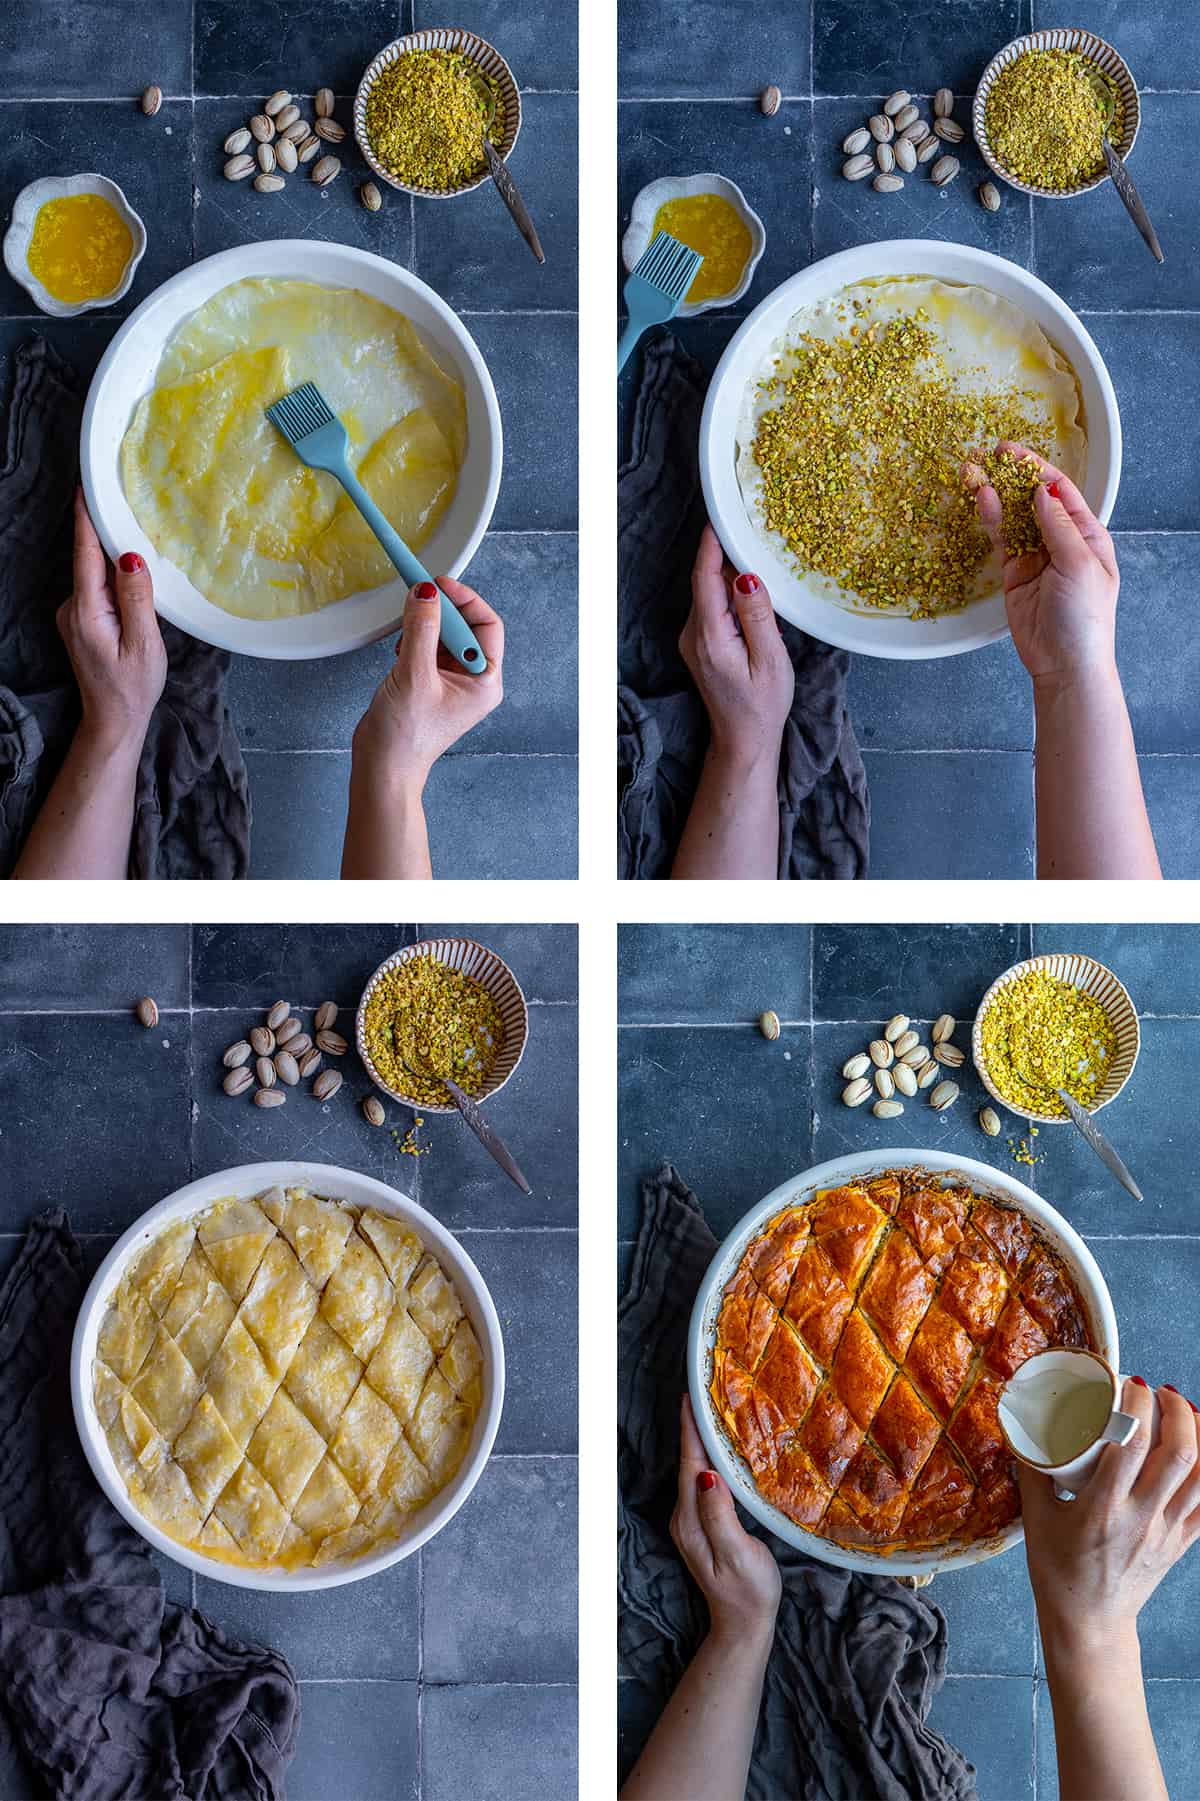 A collage of four pictures showing the steps of making baklava in a round baking pan.